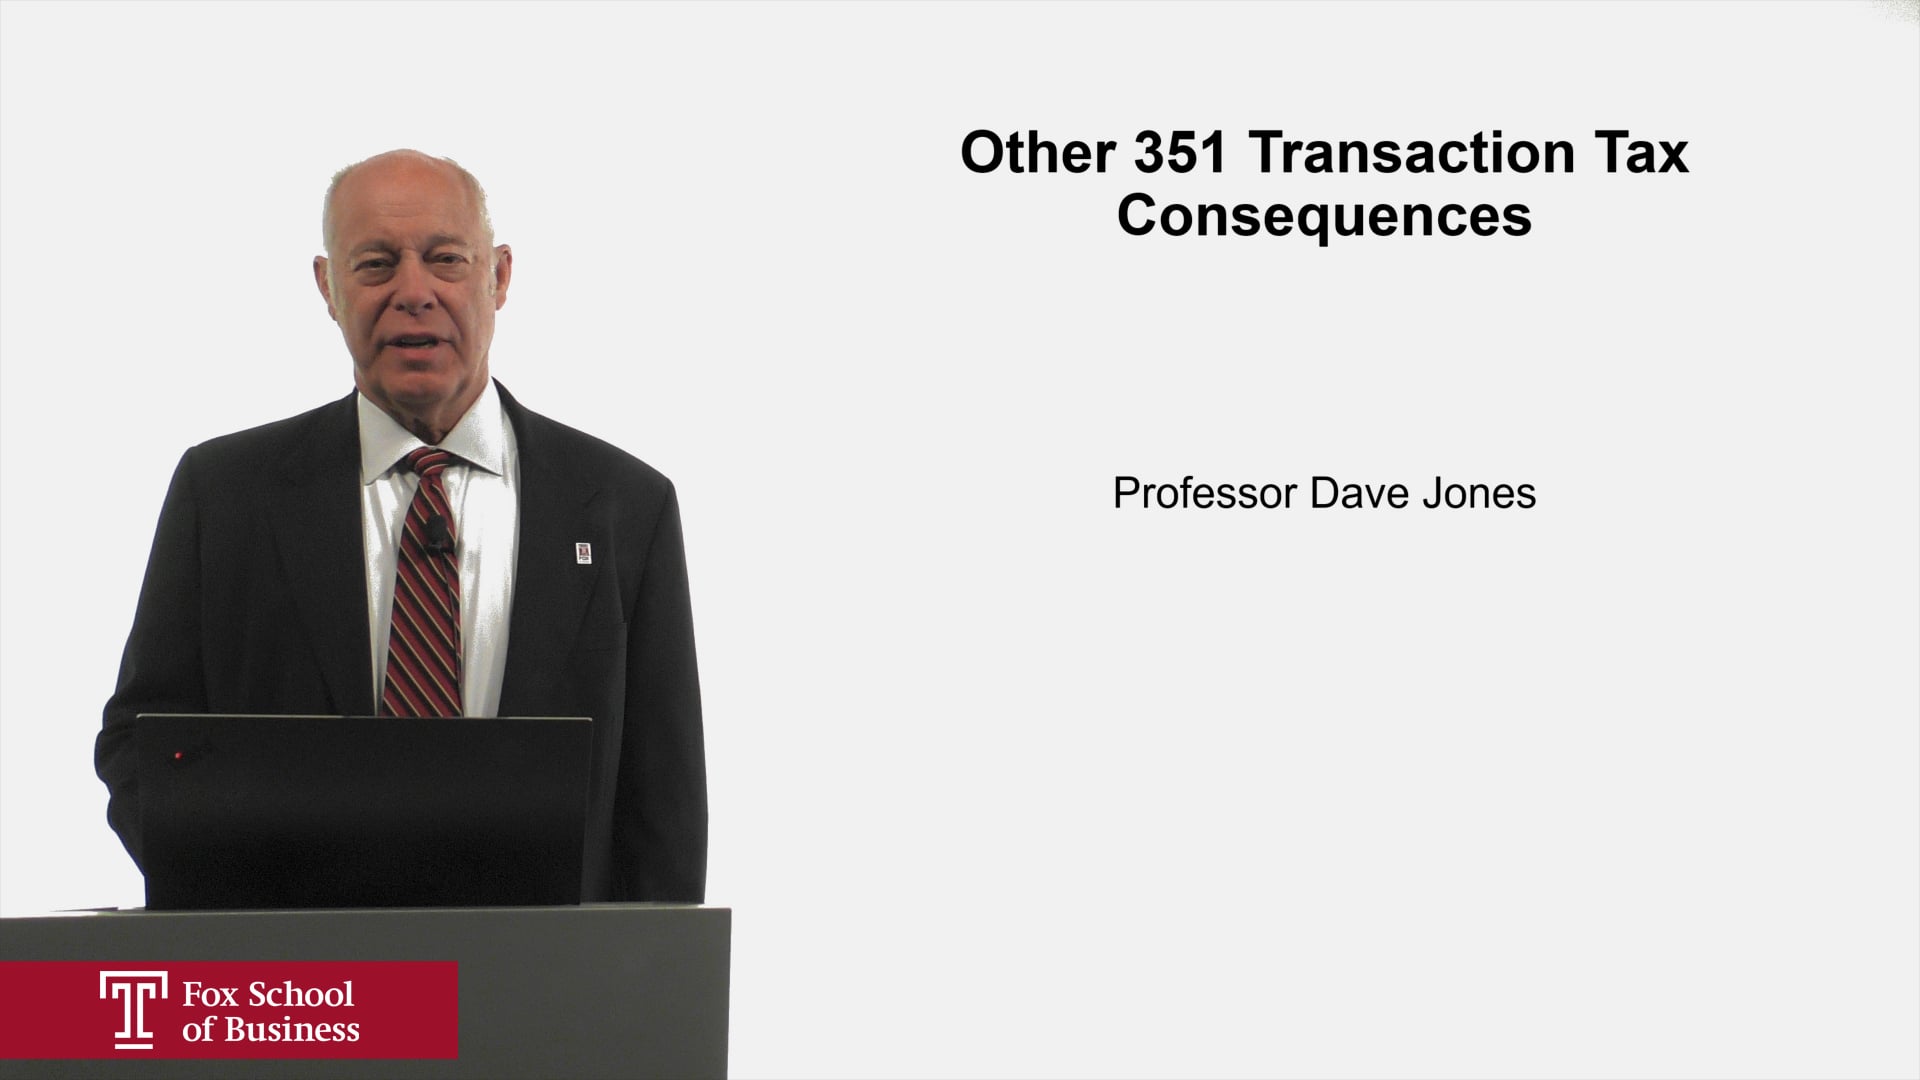 Other 351 Transaction Tax Consequences